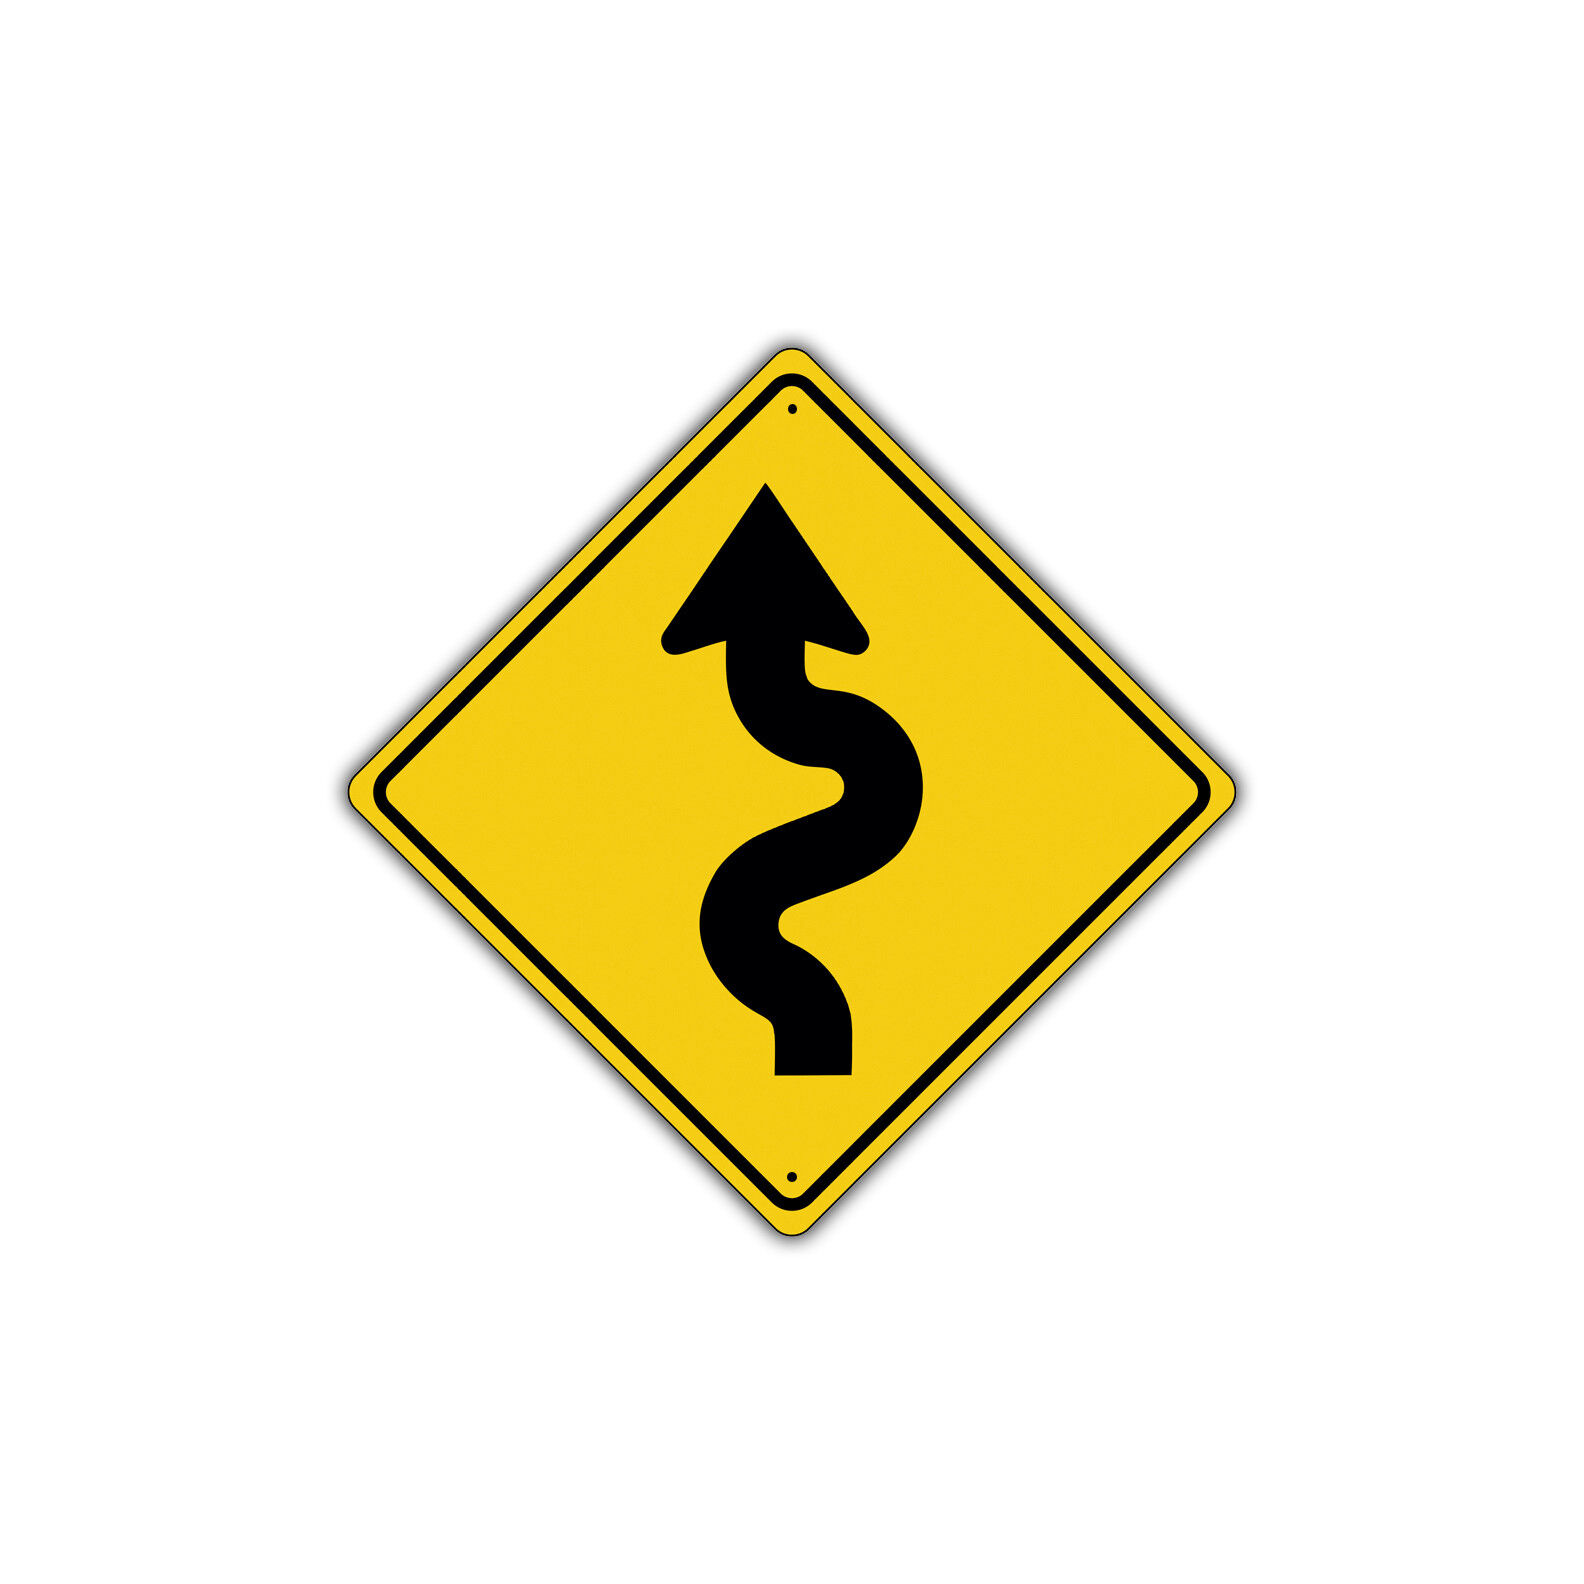 Left Winding Road with Sharp Turn Symbol Novelty Aluminum Metal Sign 12x12